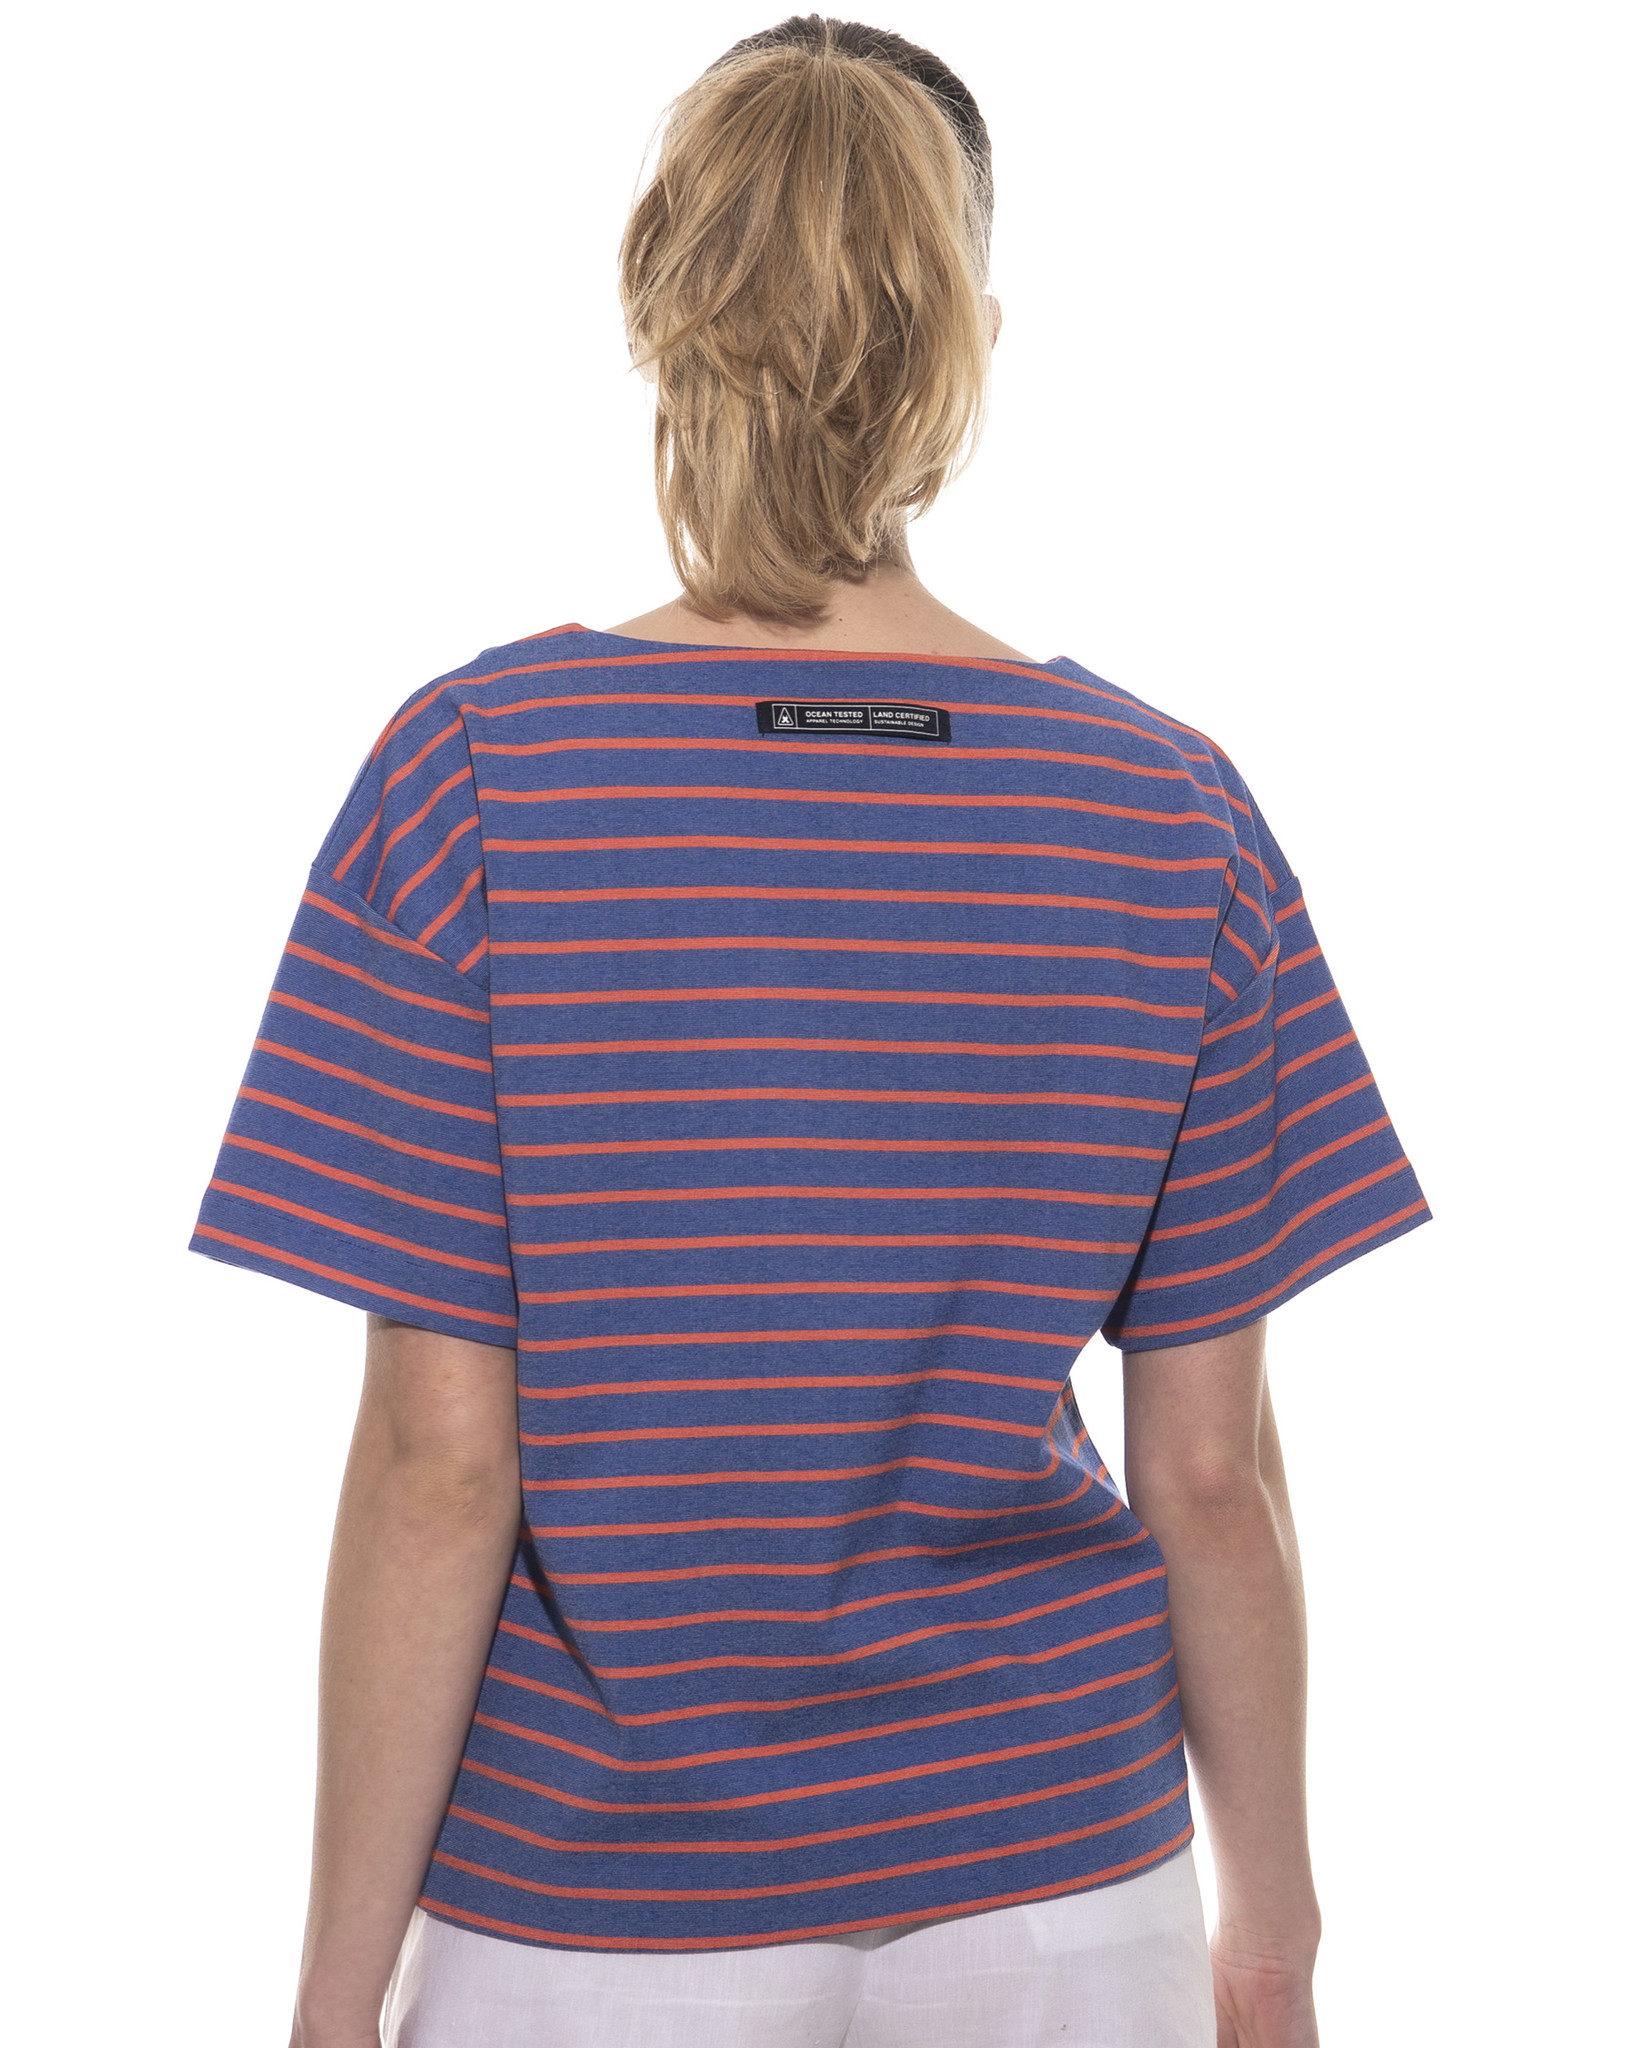 T-shirt Admiral with a striped pattern